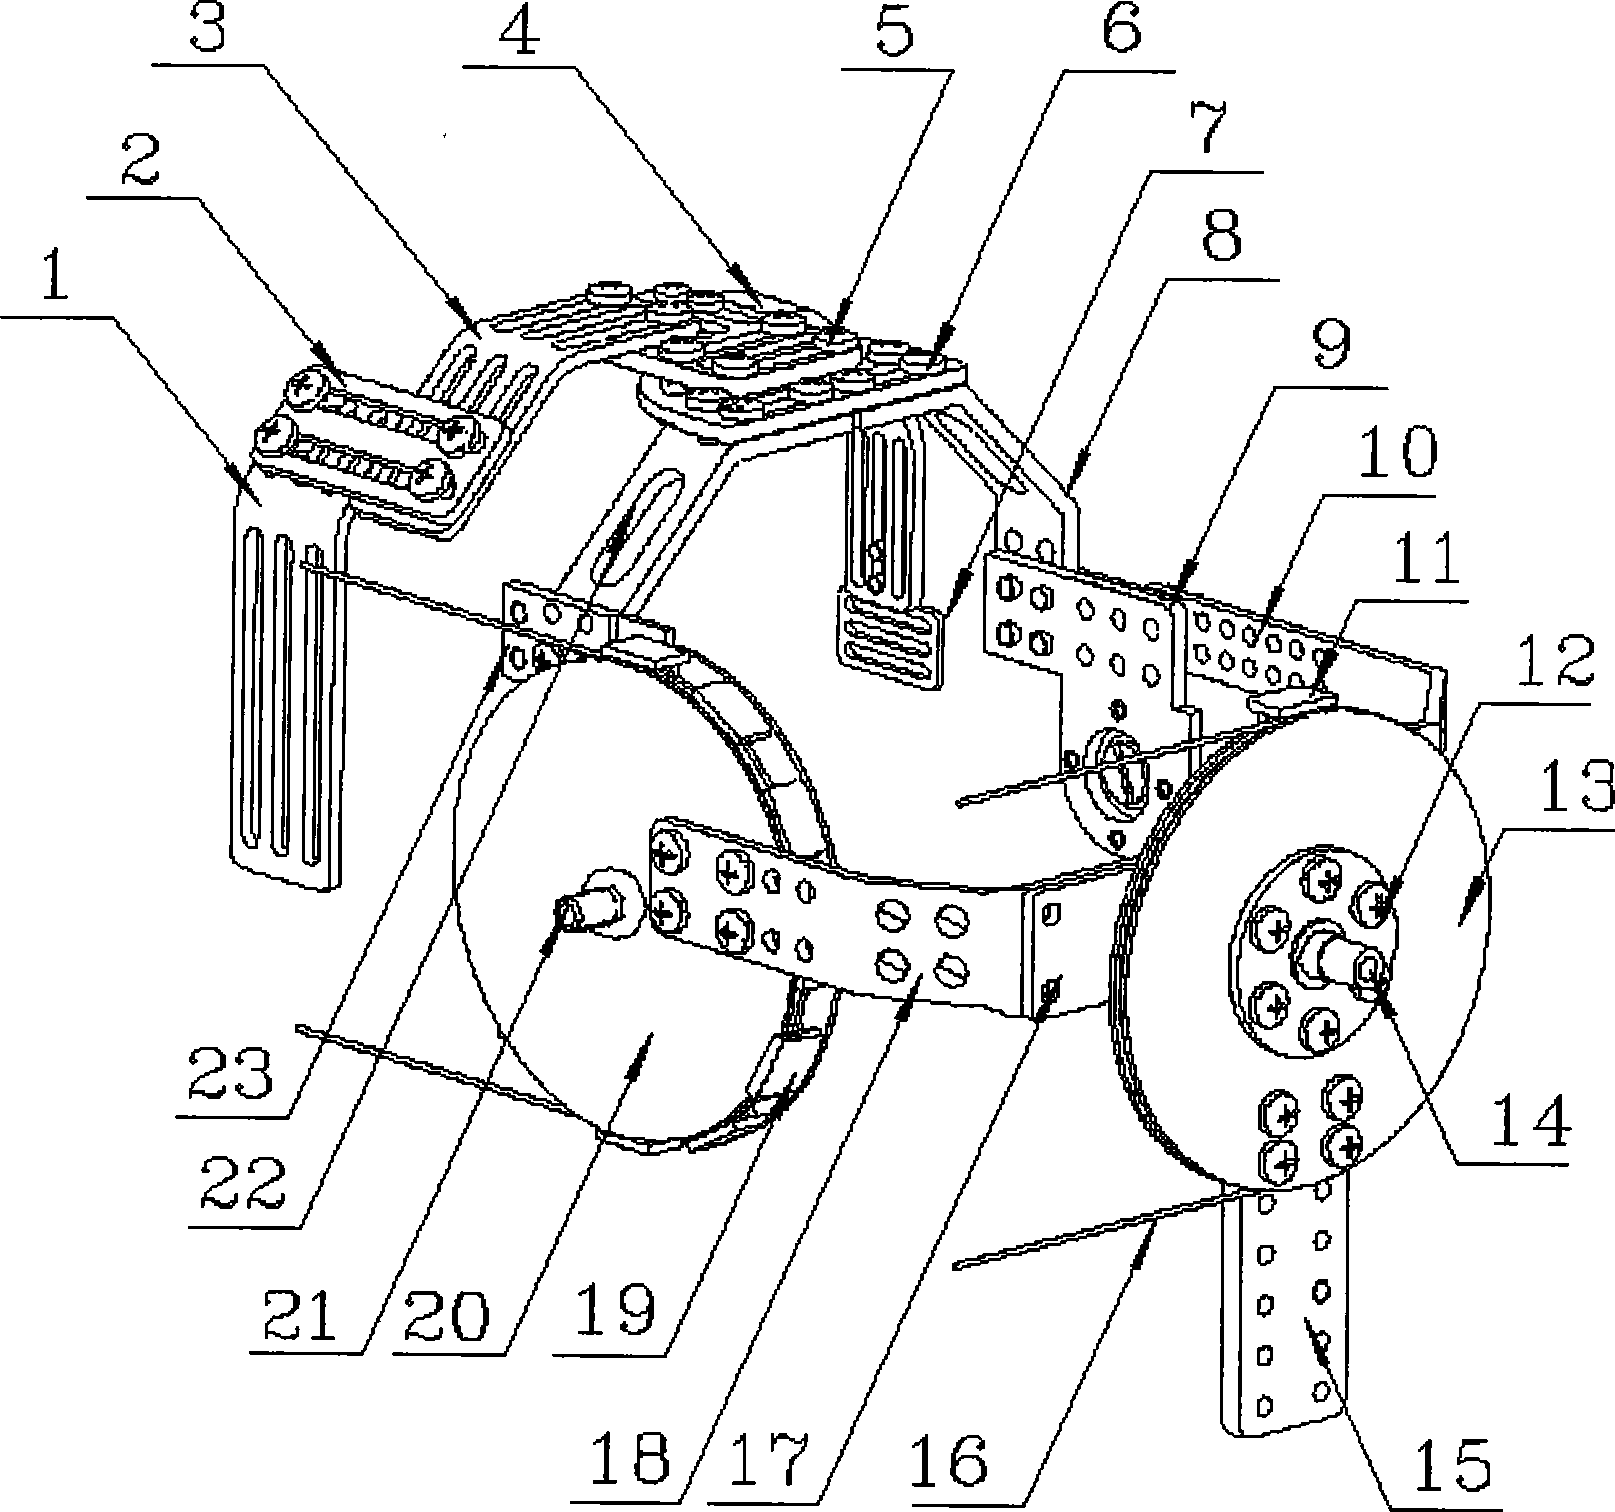 Device for healing and training shoulder joint